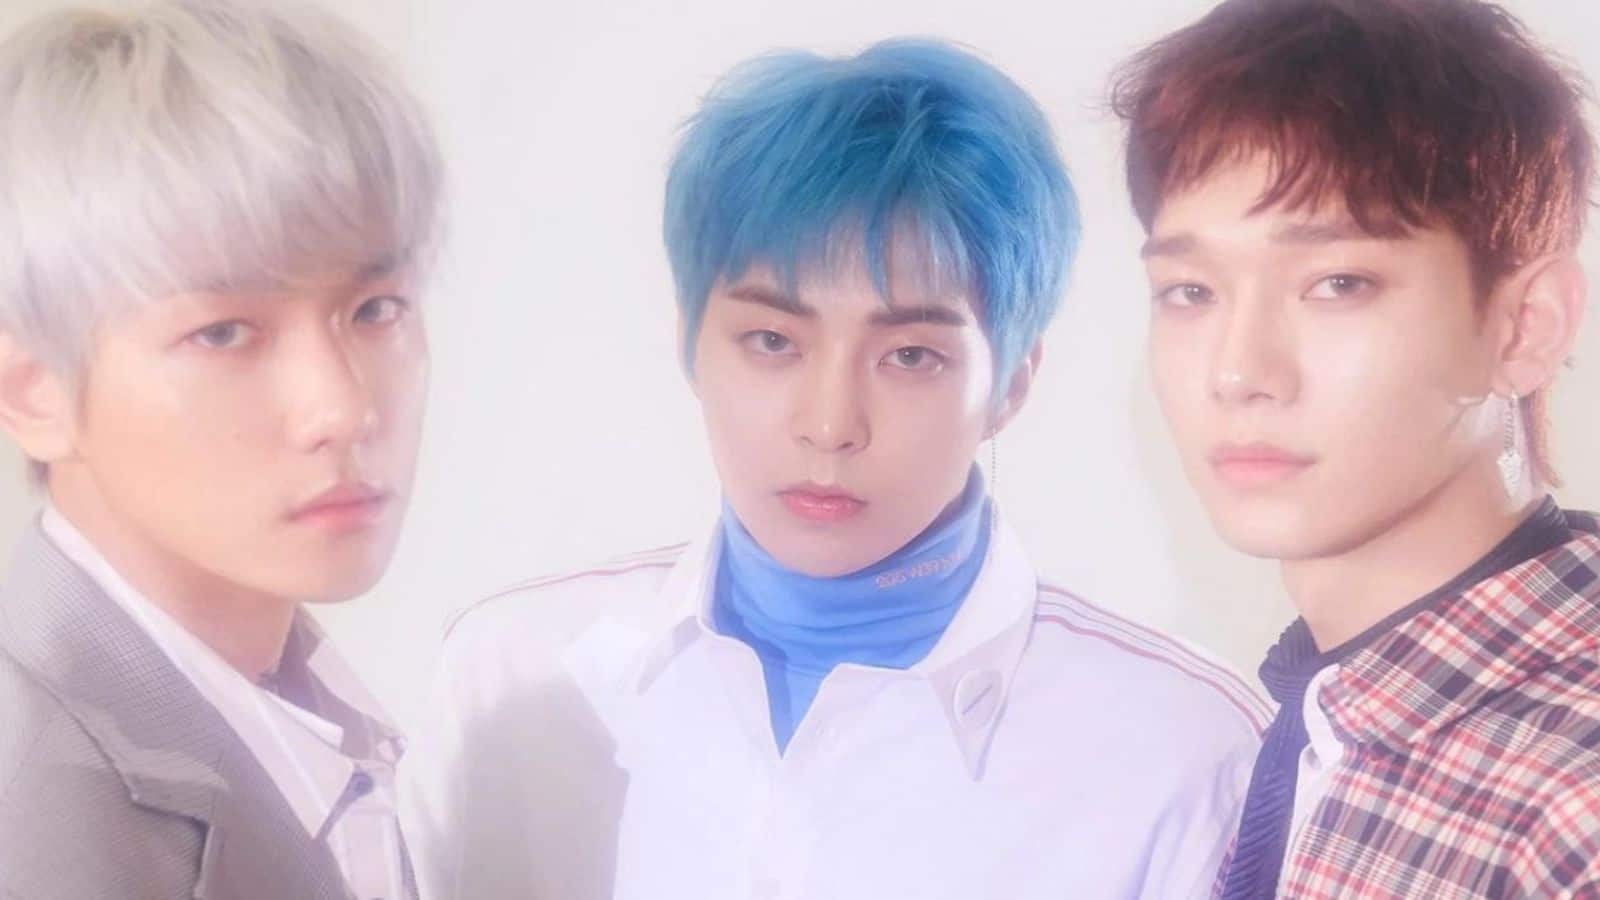 EXO-CBX members will continue as EXO amid tensions with SM